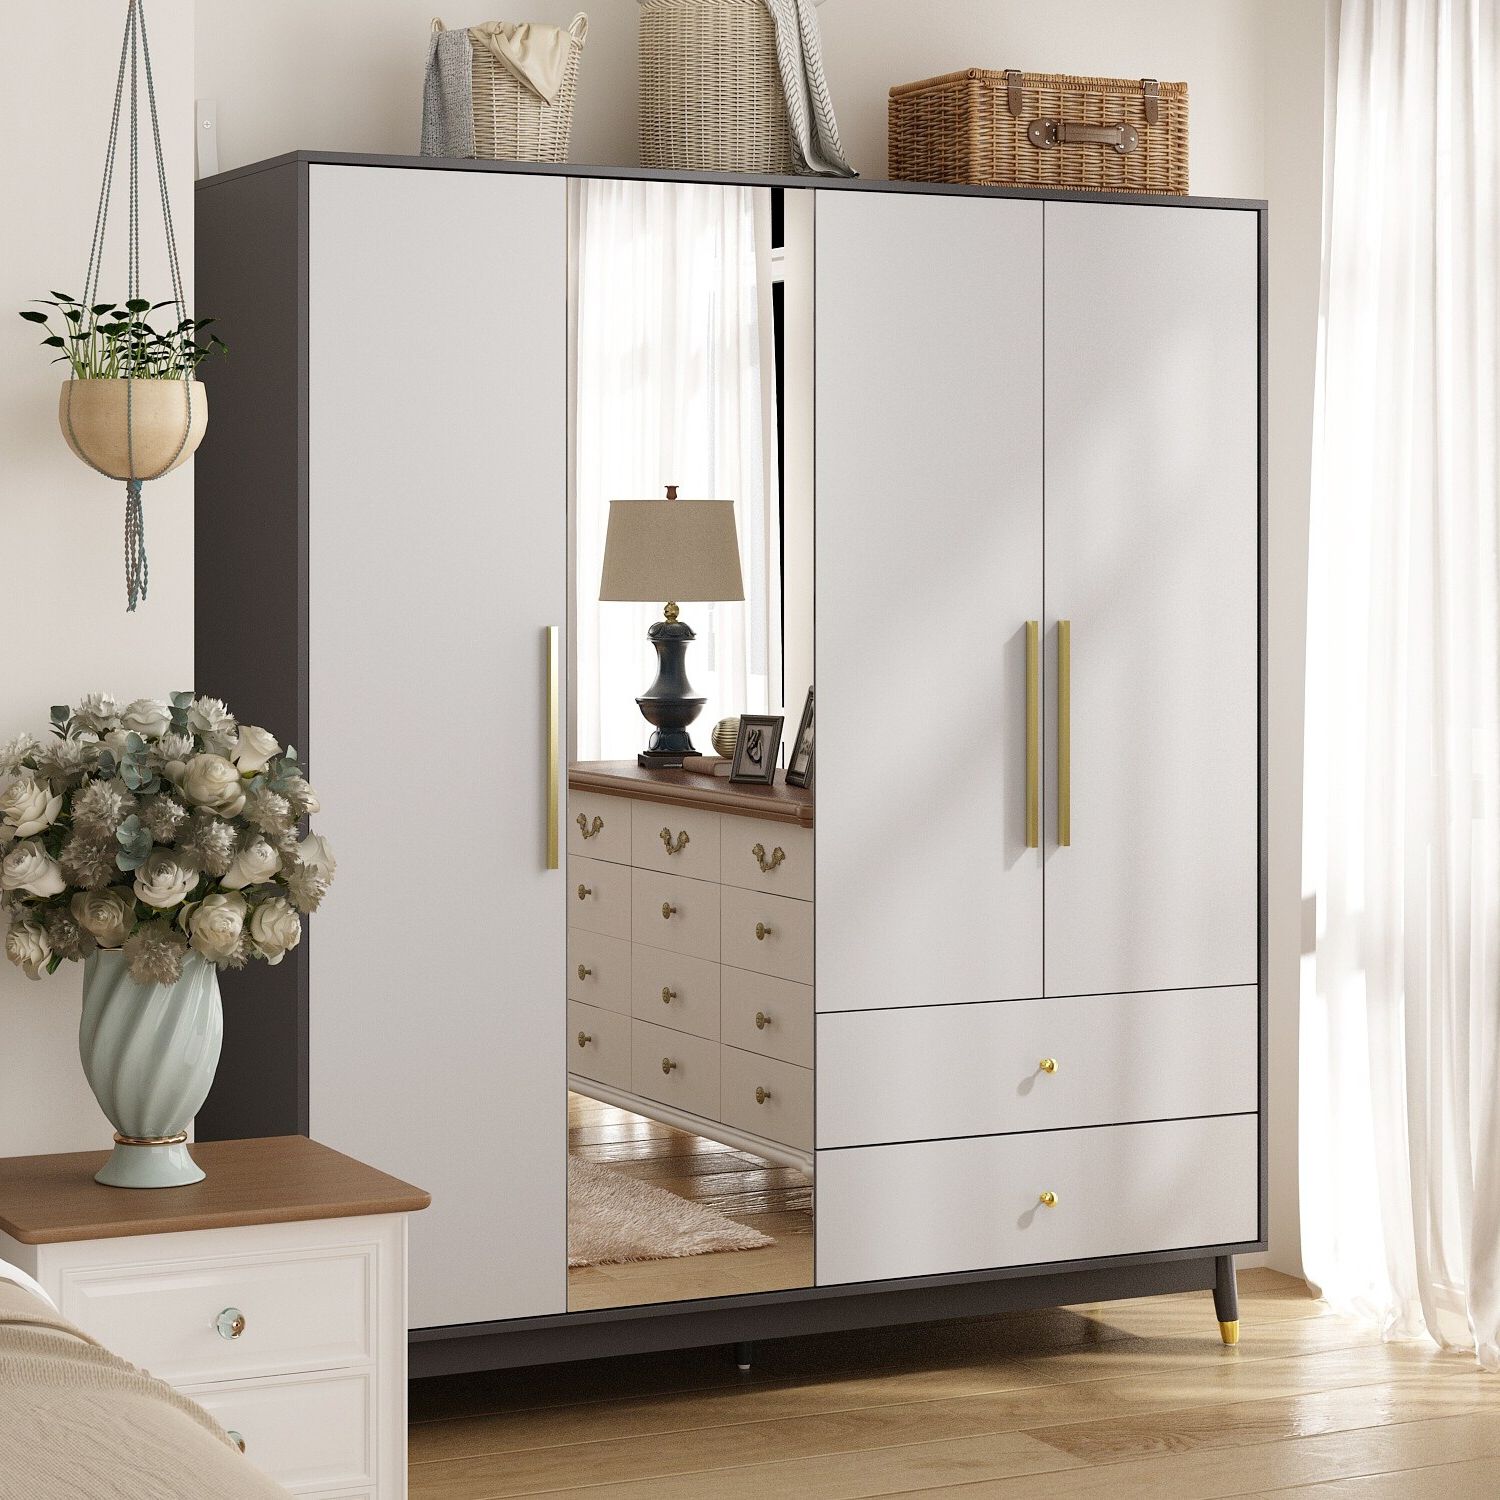 Wardrobe Armoire Closet With Mirror Wardrobe Cabinet With 2 Drawers – Bed  Bath & Beyond – 37684302 Inside Wardrobes With Mirror And Drawers (Gallery 20 of 20)